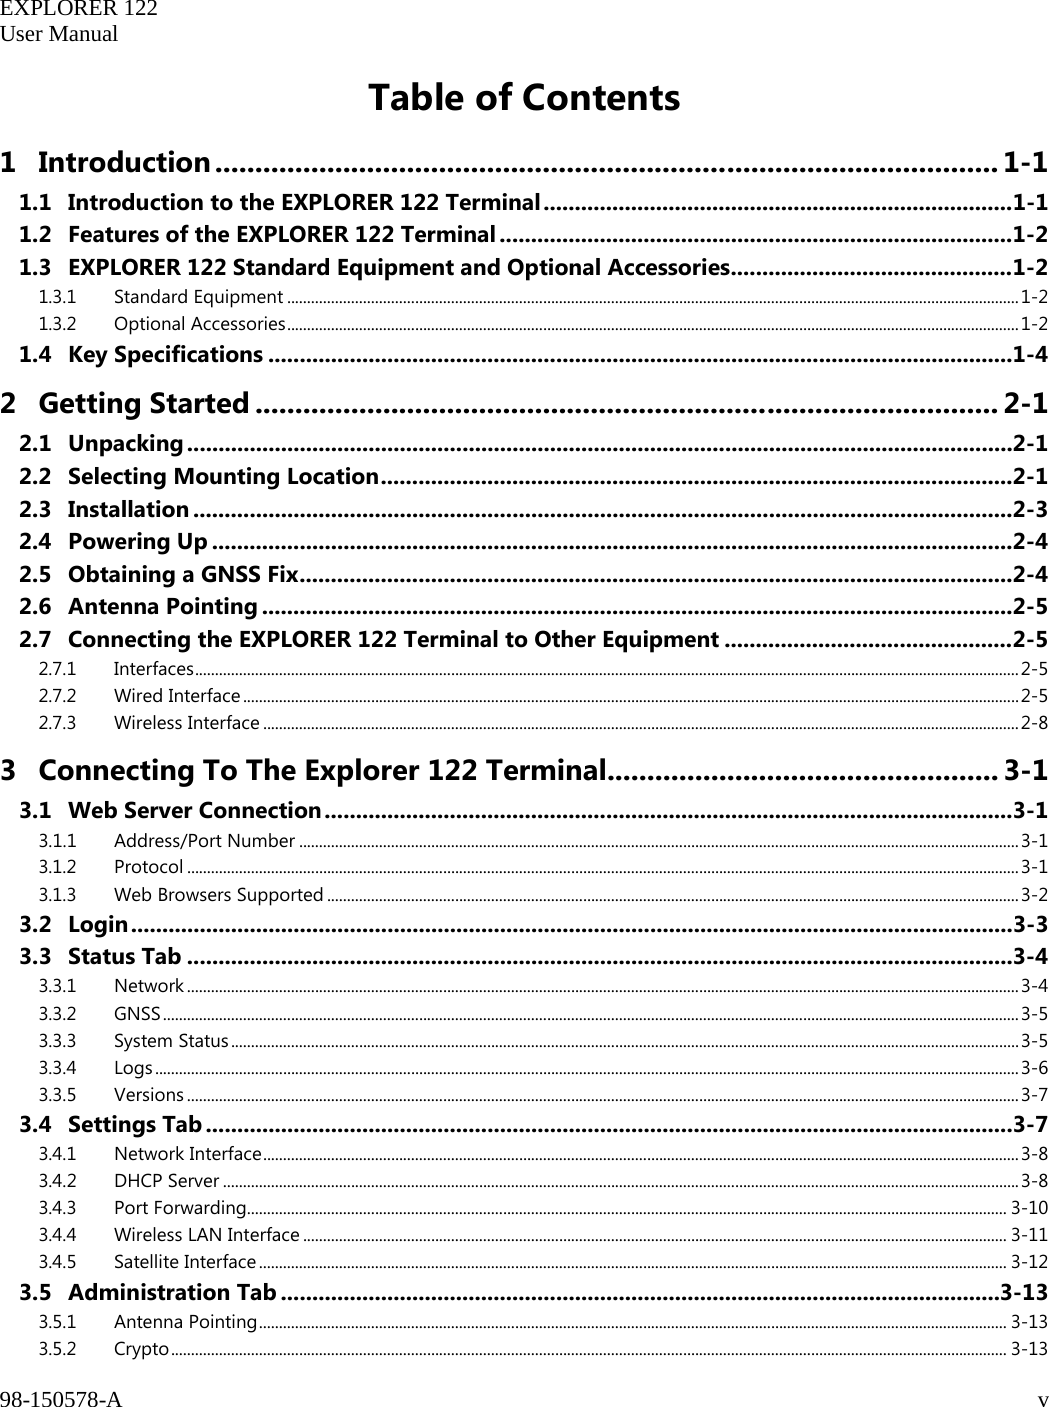   EXPLORER 122  User Manual  98-150578-A     v   Table of Contents 1 Introduction .................................................................................................. 1-1 1.1 Introduction to the EXPLORER 122 Terminal ........................................................................... 1-1 1.2 Features of the EXPLORER 122 Terminal .................................................................................. 1-2 1.3 EXPLORER 122 Standard Equipment and Optional Accessories ............................................. 1-2 1.3.1 Standard Equipment ....................................................................................................................................................................................... 1-2 1.3.2 Optional Accessories ....................................................................................................................................................................................... 1-2 1.4 Key Specifications ....................................................................................................................... 1-4 2 Getting Started ............................................................................................. 2-1 2.1 Unpacking .................................................................................................................................... 2-1 2.2 Selecting Mounting Location ..................................................................................................... 2-1 2.3 Installation ................................................................................................................................... 2-3 2.4 Powering Up ................................................................................................................................ 2-4 2.5 Obtaining a GNSS Fix .................................................................................................................. 2-4 2.6 Antenna Pointing ........................................................................................................................ 2-5 2.7 Connecting the EXPLORER 122 Terminal to Other Equipment .............................................. 2-5 2.7.1 Interfaces .............................................................................................................................................................................................................. 2-5 2.7.2 Wired Interface .................................................................................................................................................................................................. 2-5 2.7.3 Wireless Interface ............................................................................................................................................................................................. 2-8 3 Connecting To The Explorer 122 Terminal................................................. 3-1 3.1 Web Server Connection .............................................................................................................. 3-1 3.1.1 Address/Port Number .................................................................................................................................................................................... 3-1 3.1.2 Protocol ................................................................................................................................................................................................................ 3-1 3.1.3 Web Browsers Supported ............................................................................................................................................................................. 3-2 3.2  Login ............................................................................................................................................. 3-3 3.3 Status Tab .................................................................................................................................... 3-4 3.3.1 Network ................................................................................................................................................................................................................ 3-4 3.3.2 GNSS ...................................................................................................................................................................................................................... 3-5 3.3.3 System Status ..................................................................................................................................................................................................... 3-5 3.3.4 Logs ........................................................................................................................................................................................................................ 3-6 3.3.5 Versions ................................................................................................................................................................................................................ 3-7 3.4 Settings Tab ................................................................................................................................. 3-7 3.4.1 Network Interface ............................................................................................................................................................................................. 3-8 3.4.2 DHCP Server ....................................................................................................................................................................................................... 3-8 3.4.3 Port Forwarding.............................................................................................................................................................................................. 3-10 3.4.4 Wireless LAN Interface ................................................................................................................................................................................ 3-11 3.4.5 Satellite Interface ........................................................................................................................................................................................... 3-12 3.5 Administration Tab ................................................................................................................... 3-13 3.5.1 Antenna Pointing ........................................................................................................................................................................................... 3-13 3.5.2 Crypto ................................................................................................................................................................................................................. 3-13 